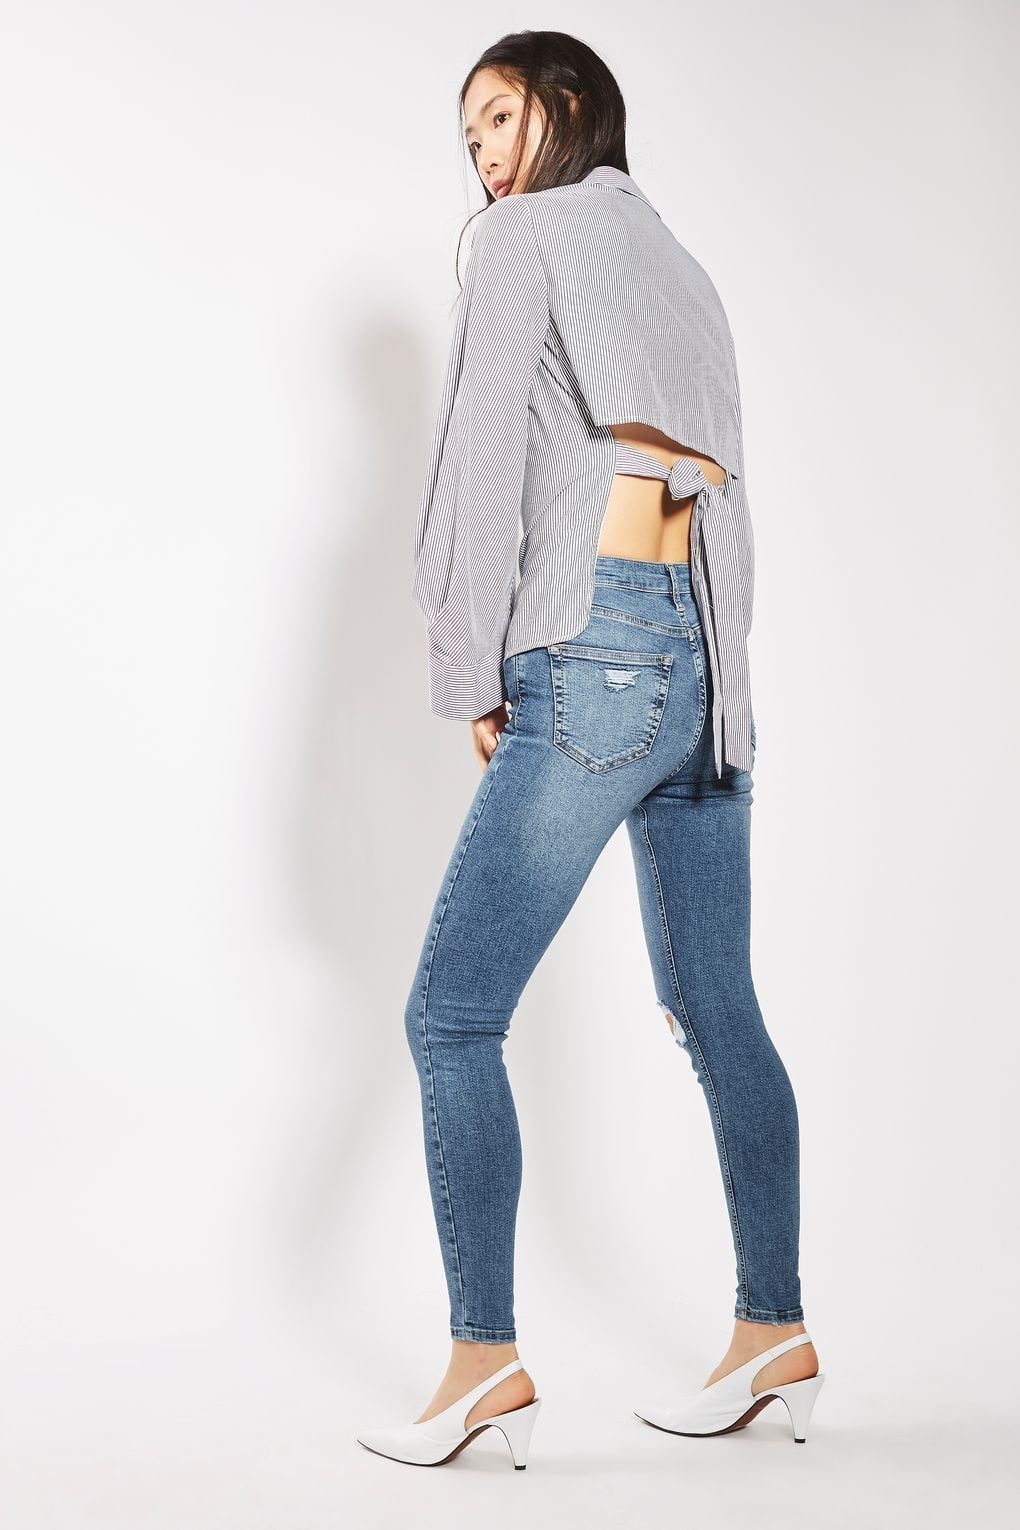 Topshop Moto Jamie Jeans | We Are Obsessing Over These Topshop Jeans — and They're All Under $80 | Fashion Photo 8